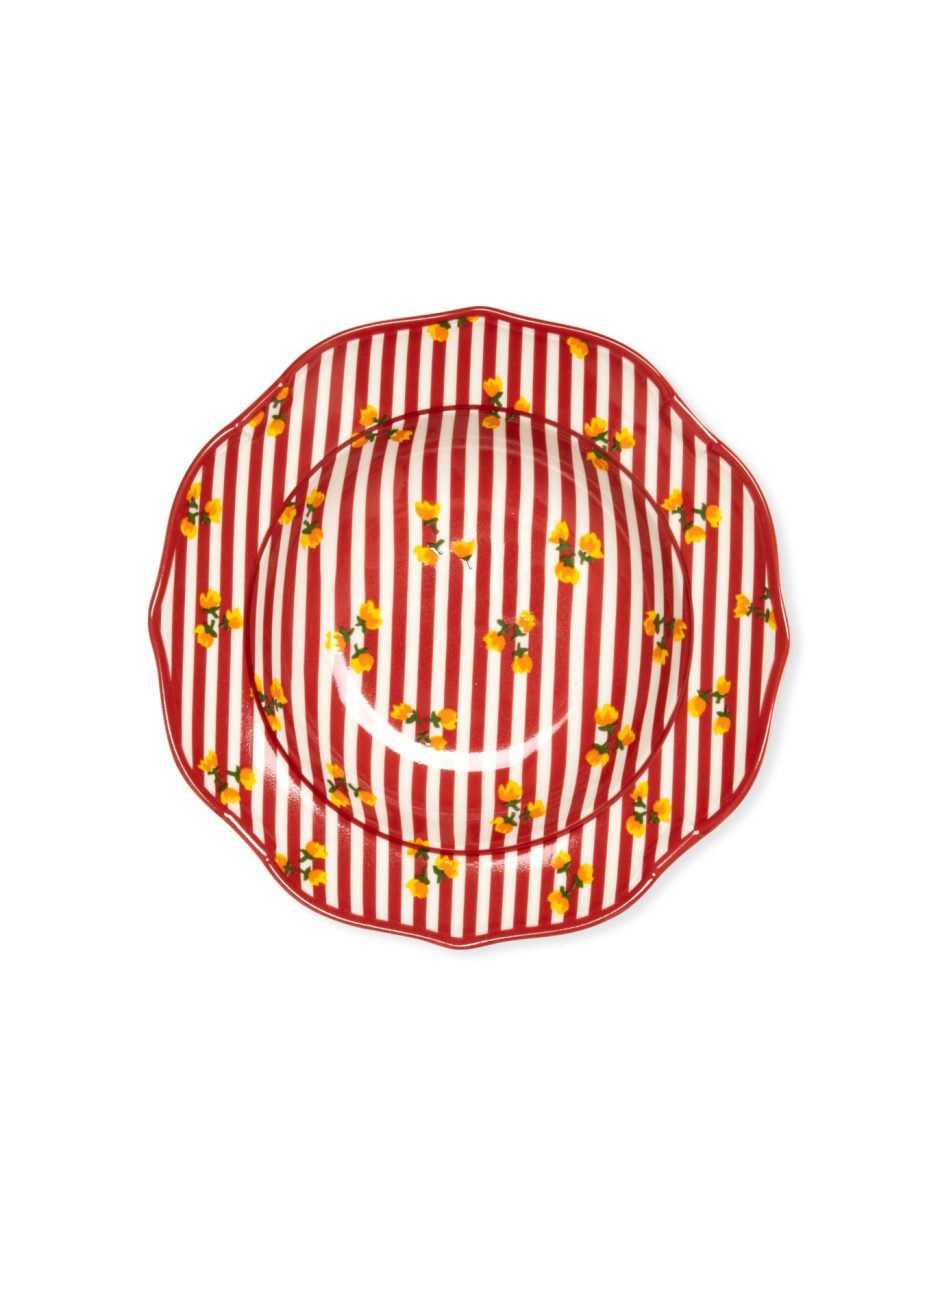 FLOWERED STRIPES SOUP PLATE